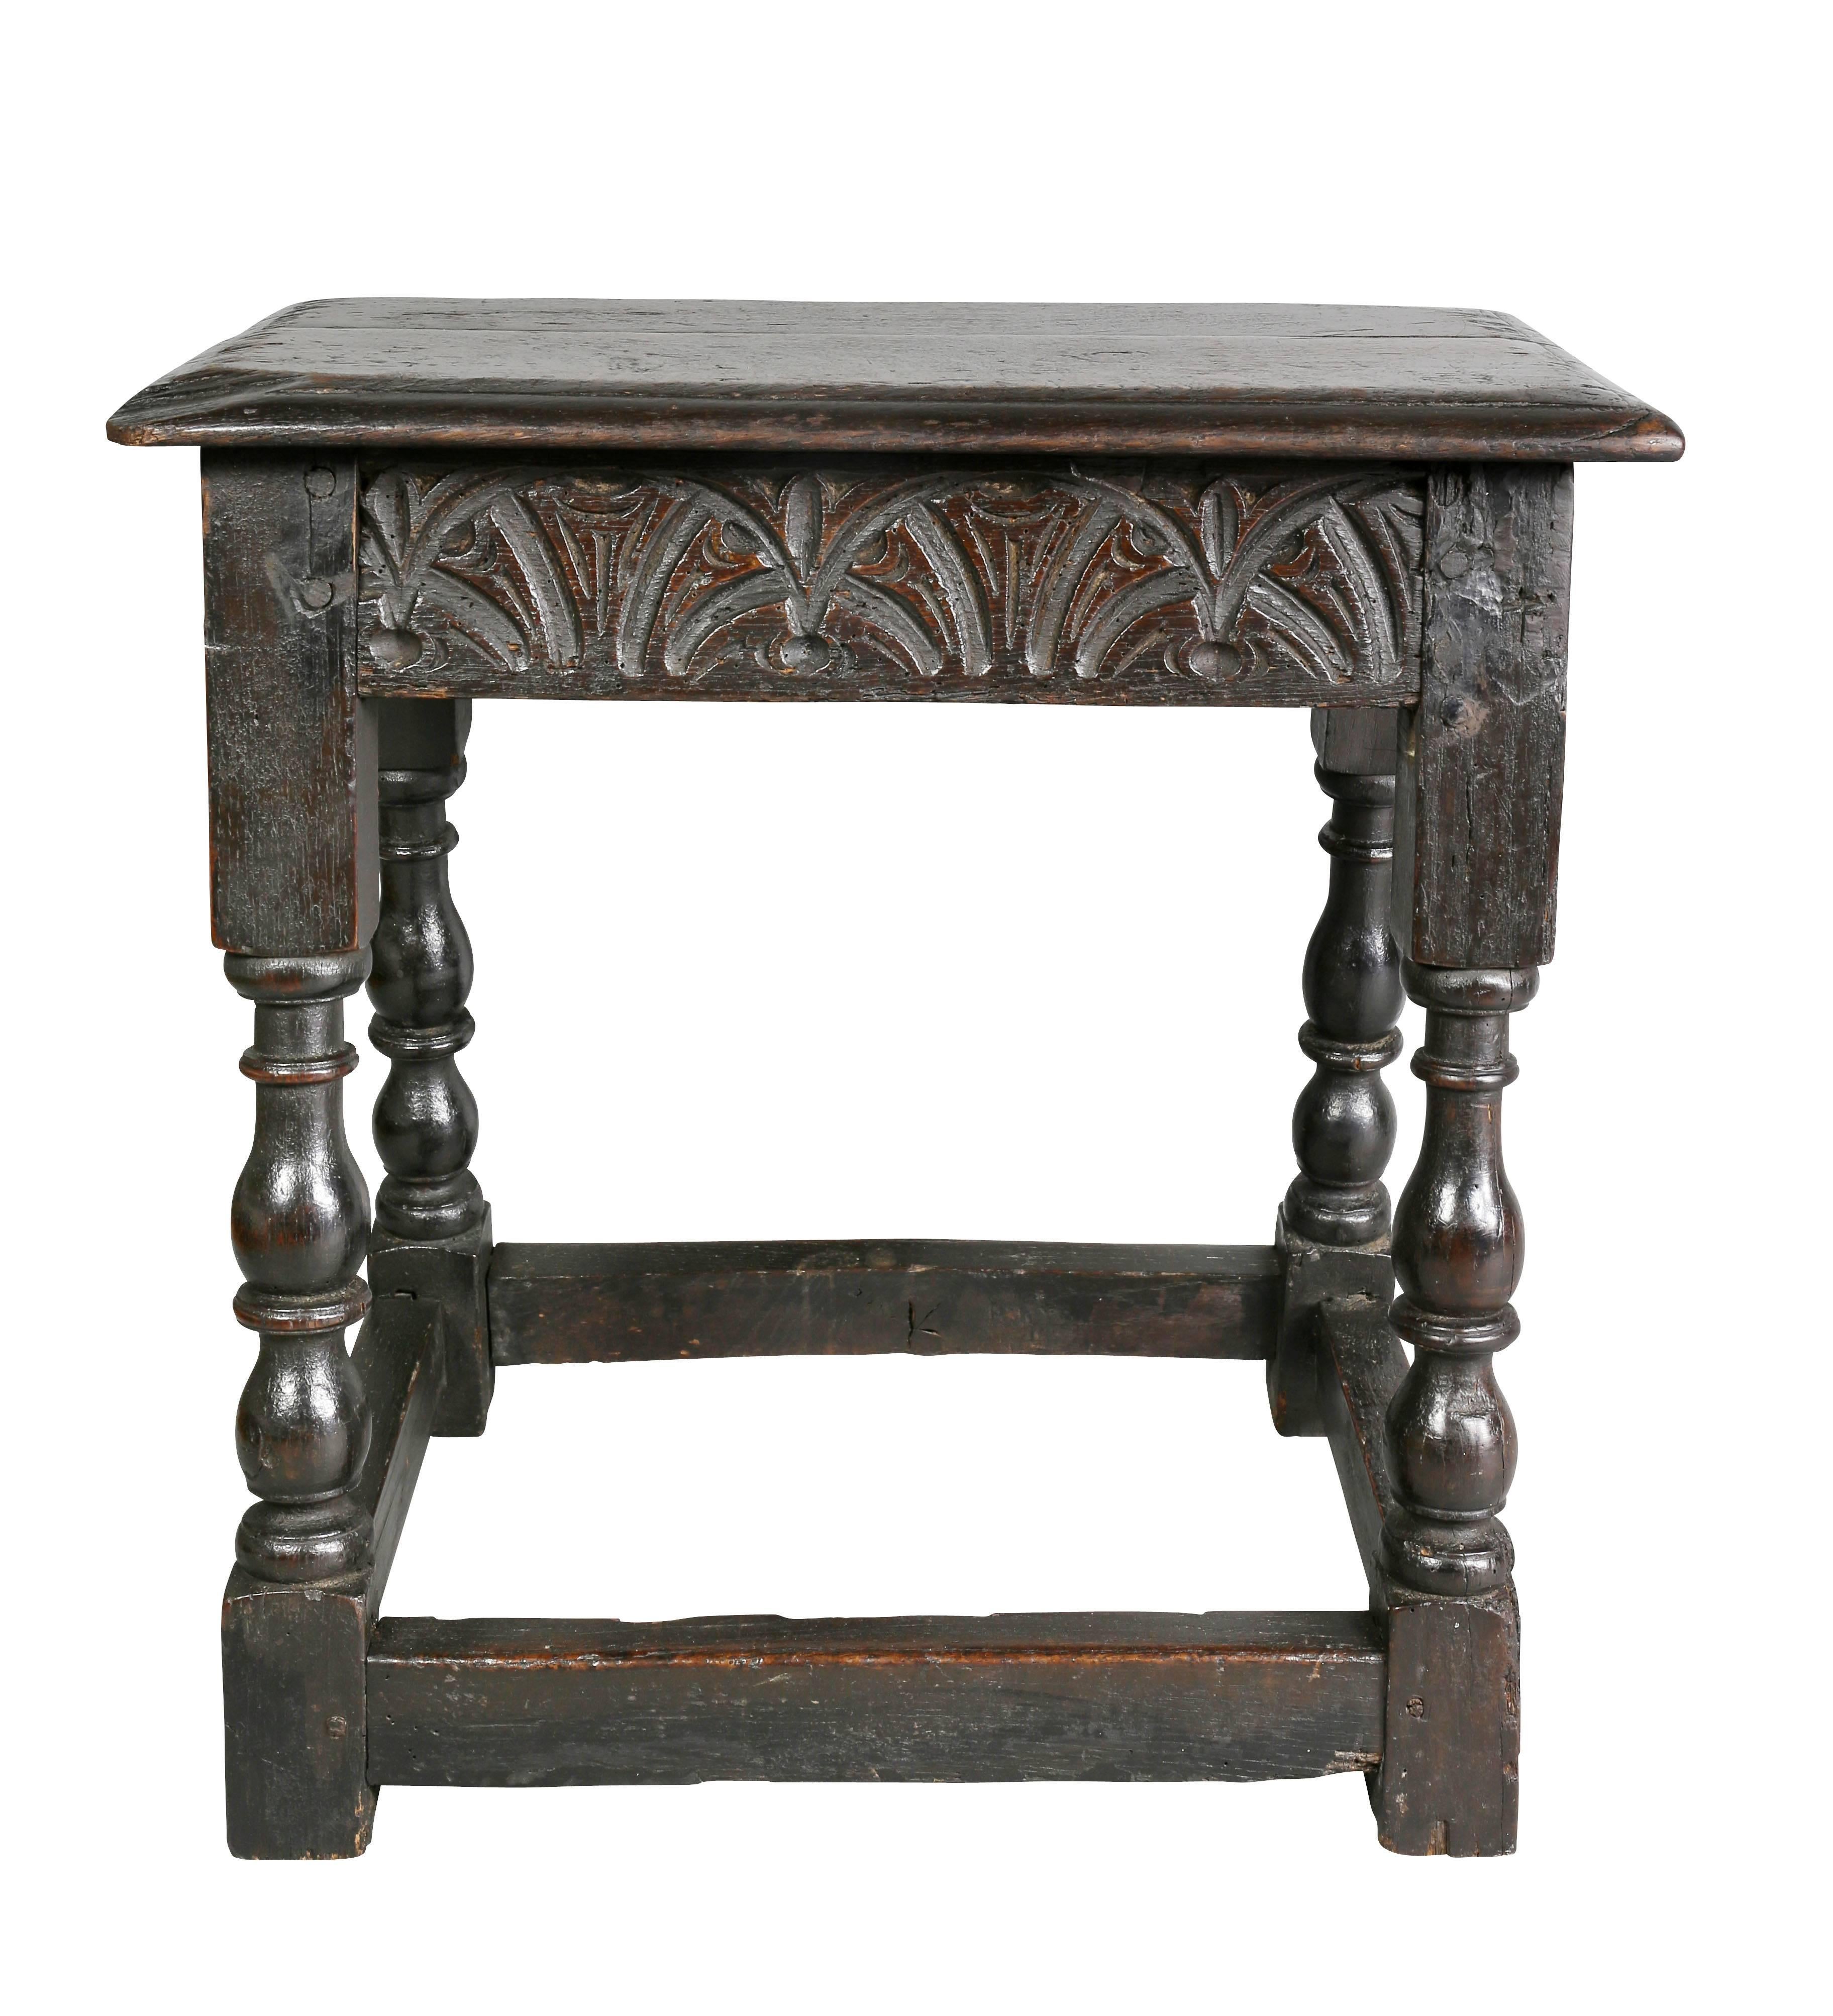 Rectangular top over a carved frieze, turned legs with box stretchers.